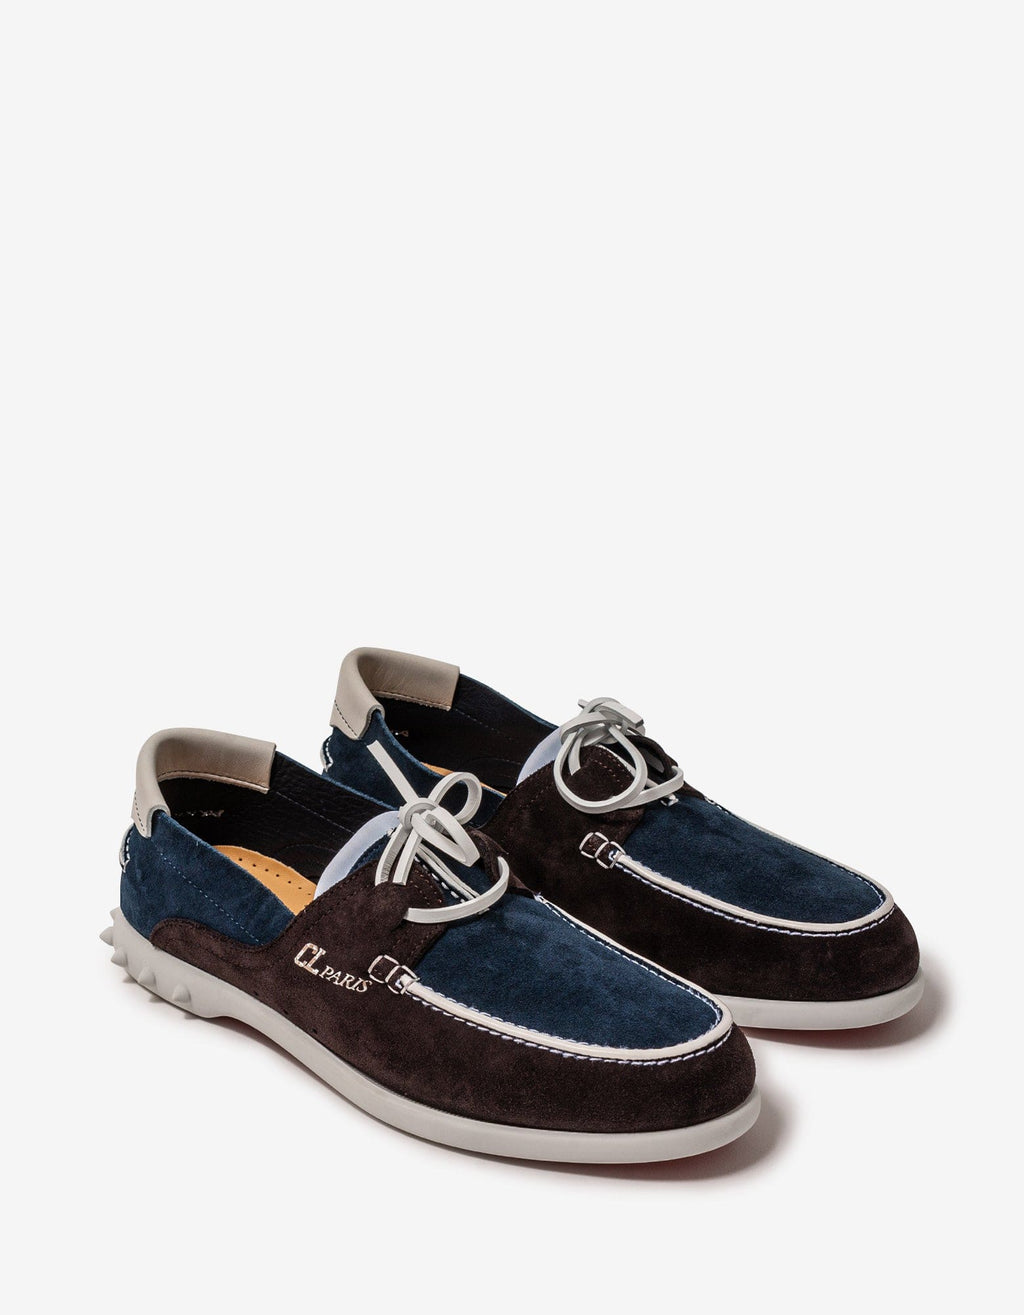 Christian Louboutin Christian Louboutin Geromoc Navy & Brown Suede Leather Loafer